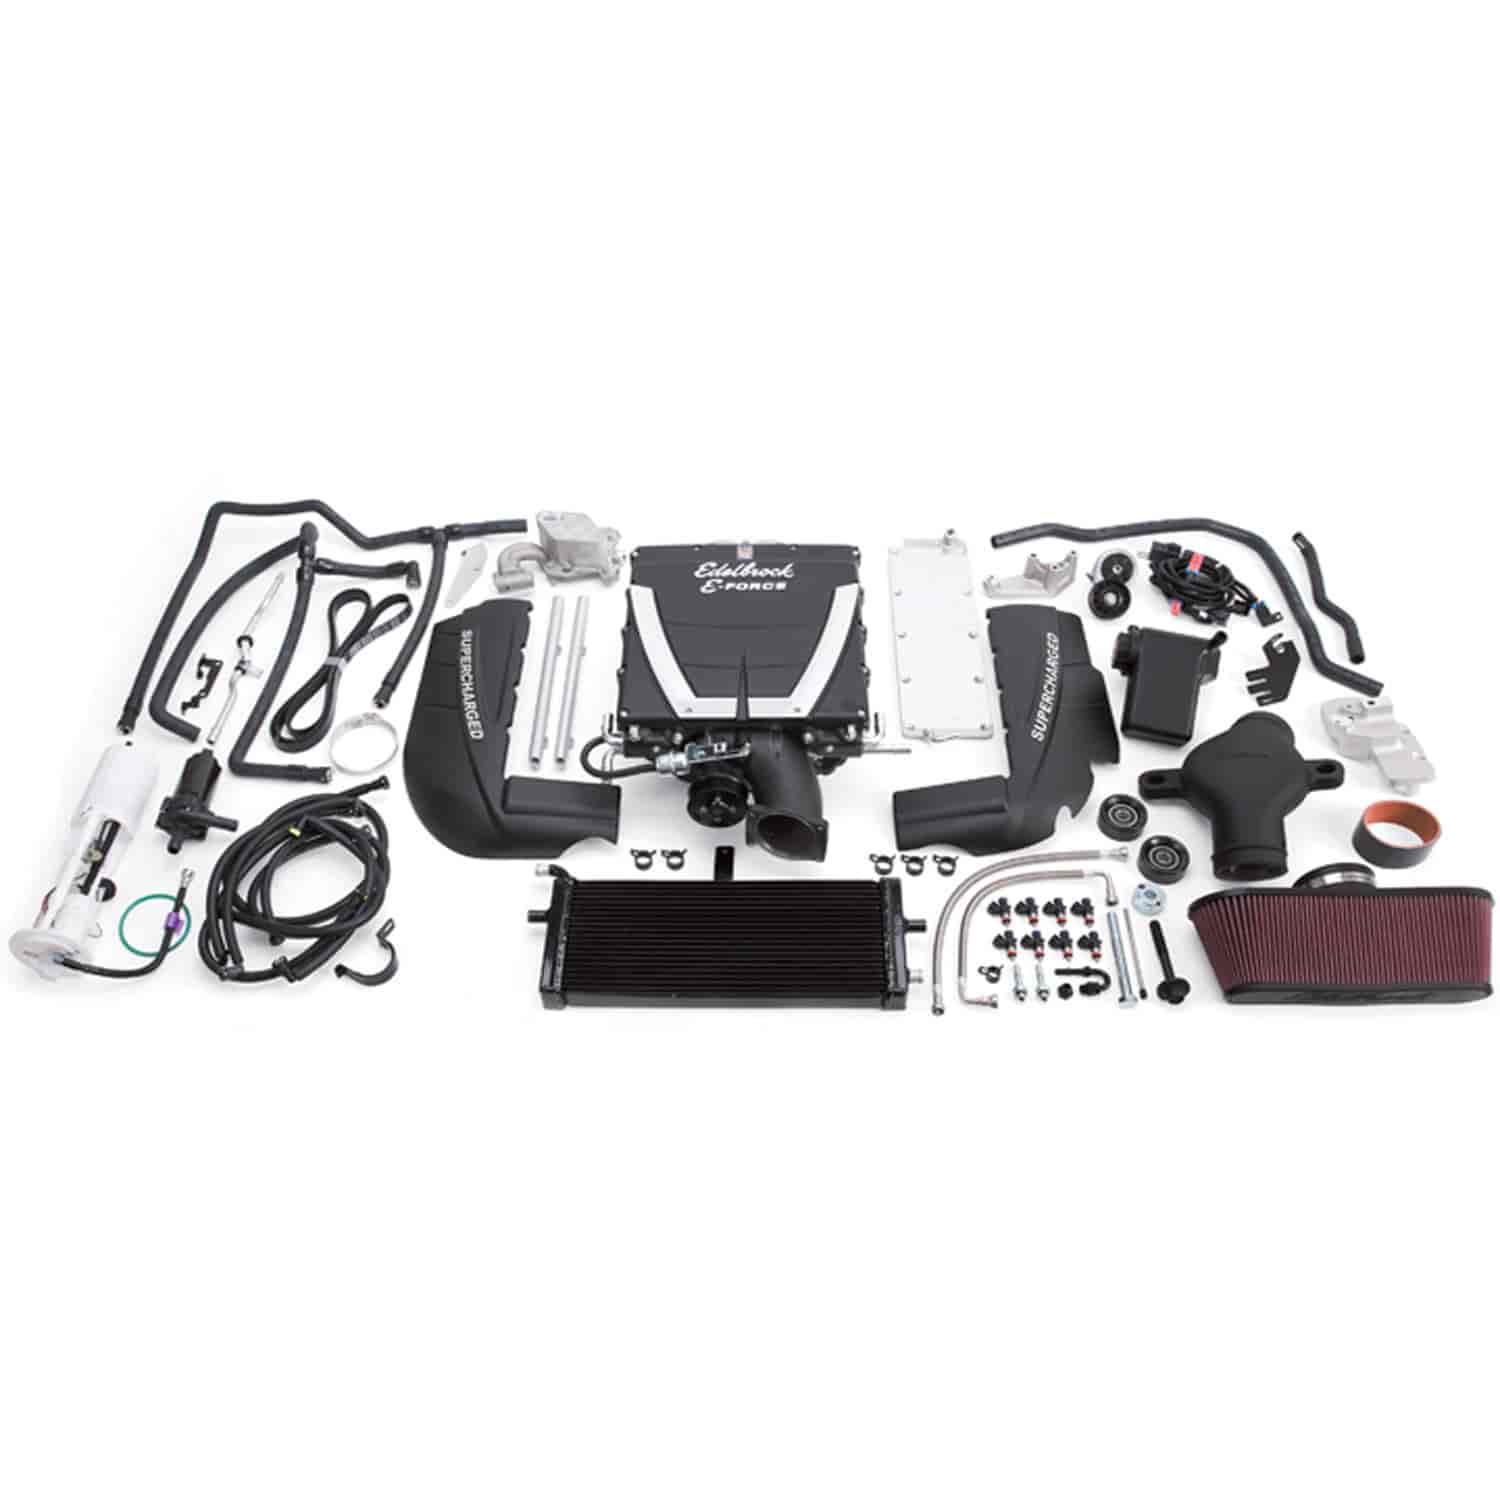 E-Force Stage 2 Supercharger Kit for 2010-2013 Grand Sport Corvette LS3 with Dry Sump Oil System